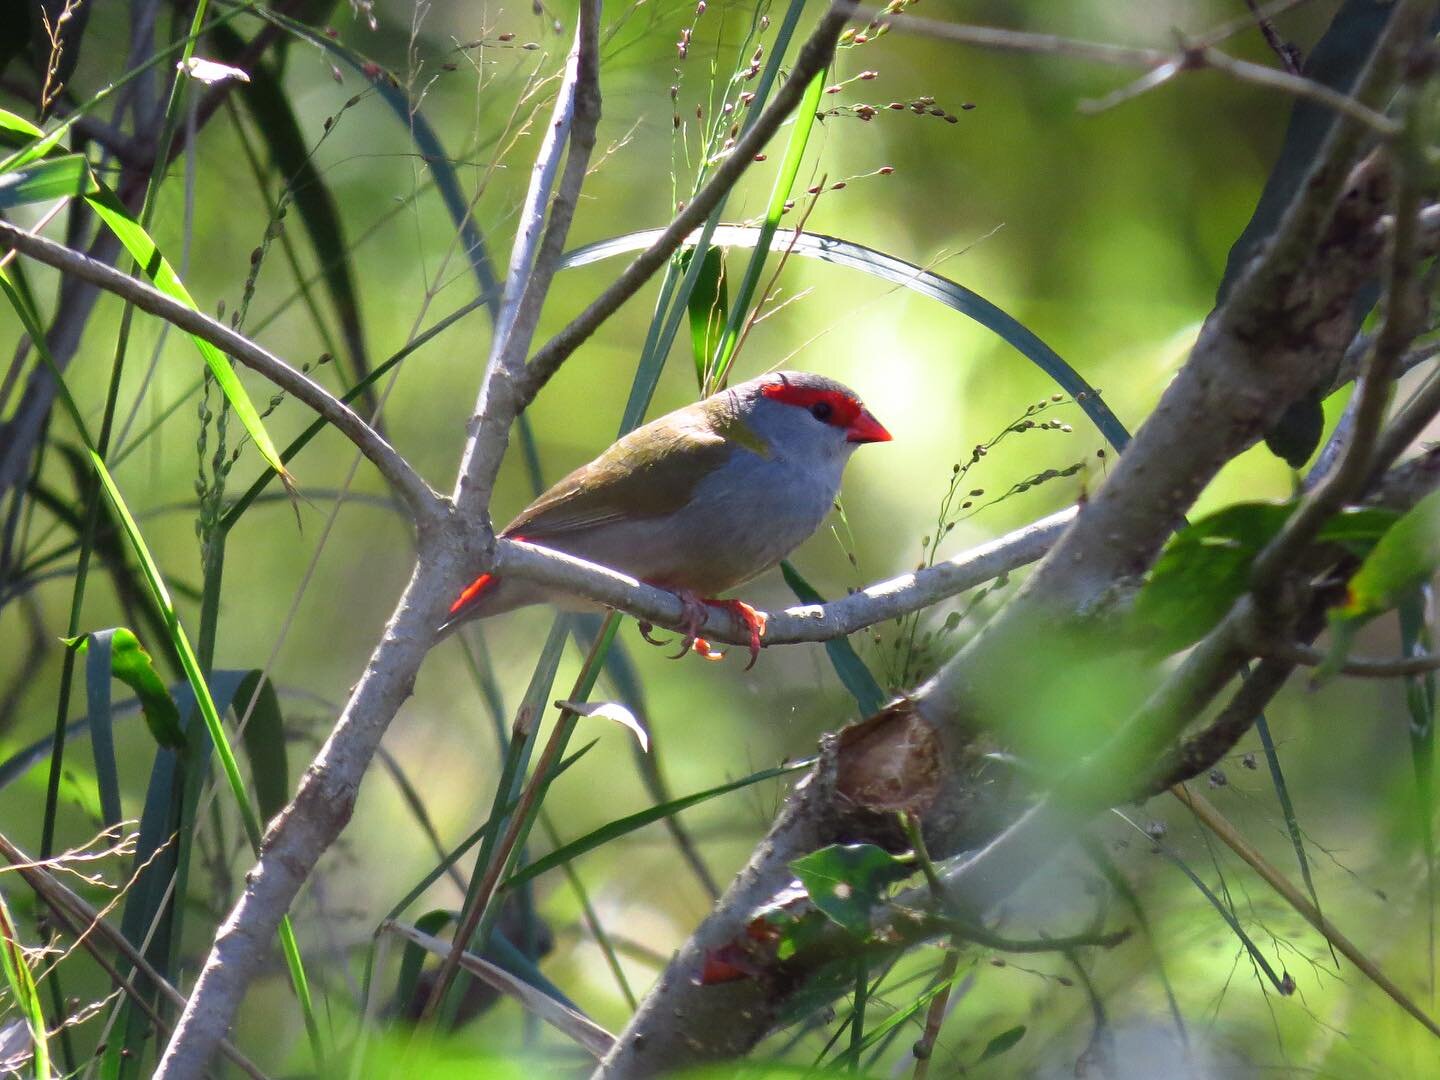 Vote for the location of our Autumn Walk! ✨Check your emails - the newsletter is out with three locations to choose from, all of which have these little beauties (a favorite of mine), the Red-browed Finch 😍

Thanks to everyone who&rsquo;s voted so f